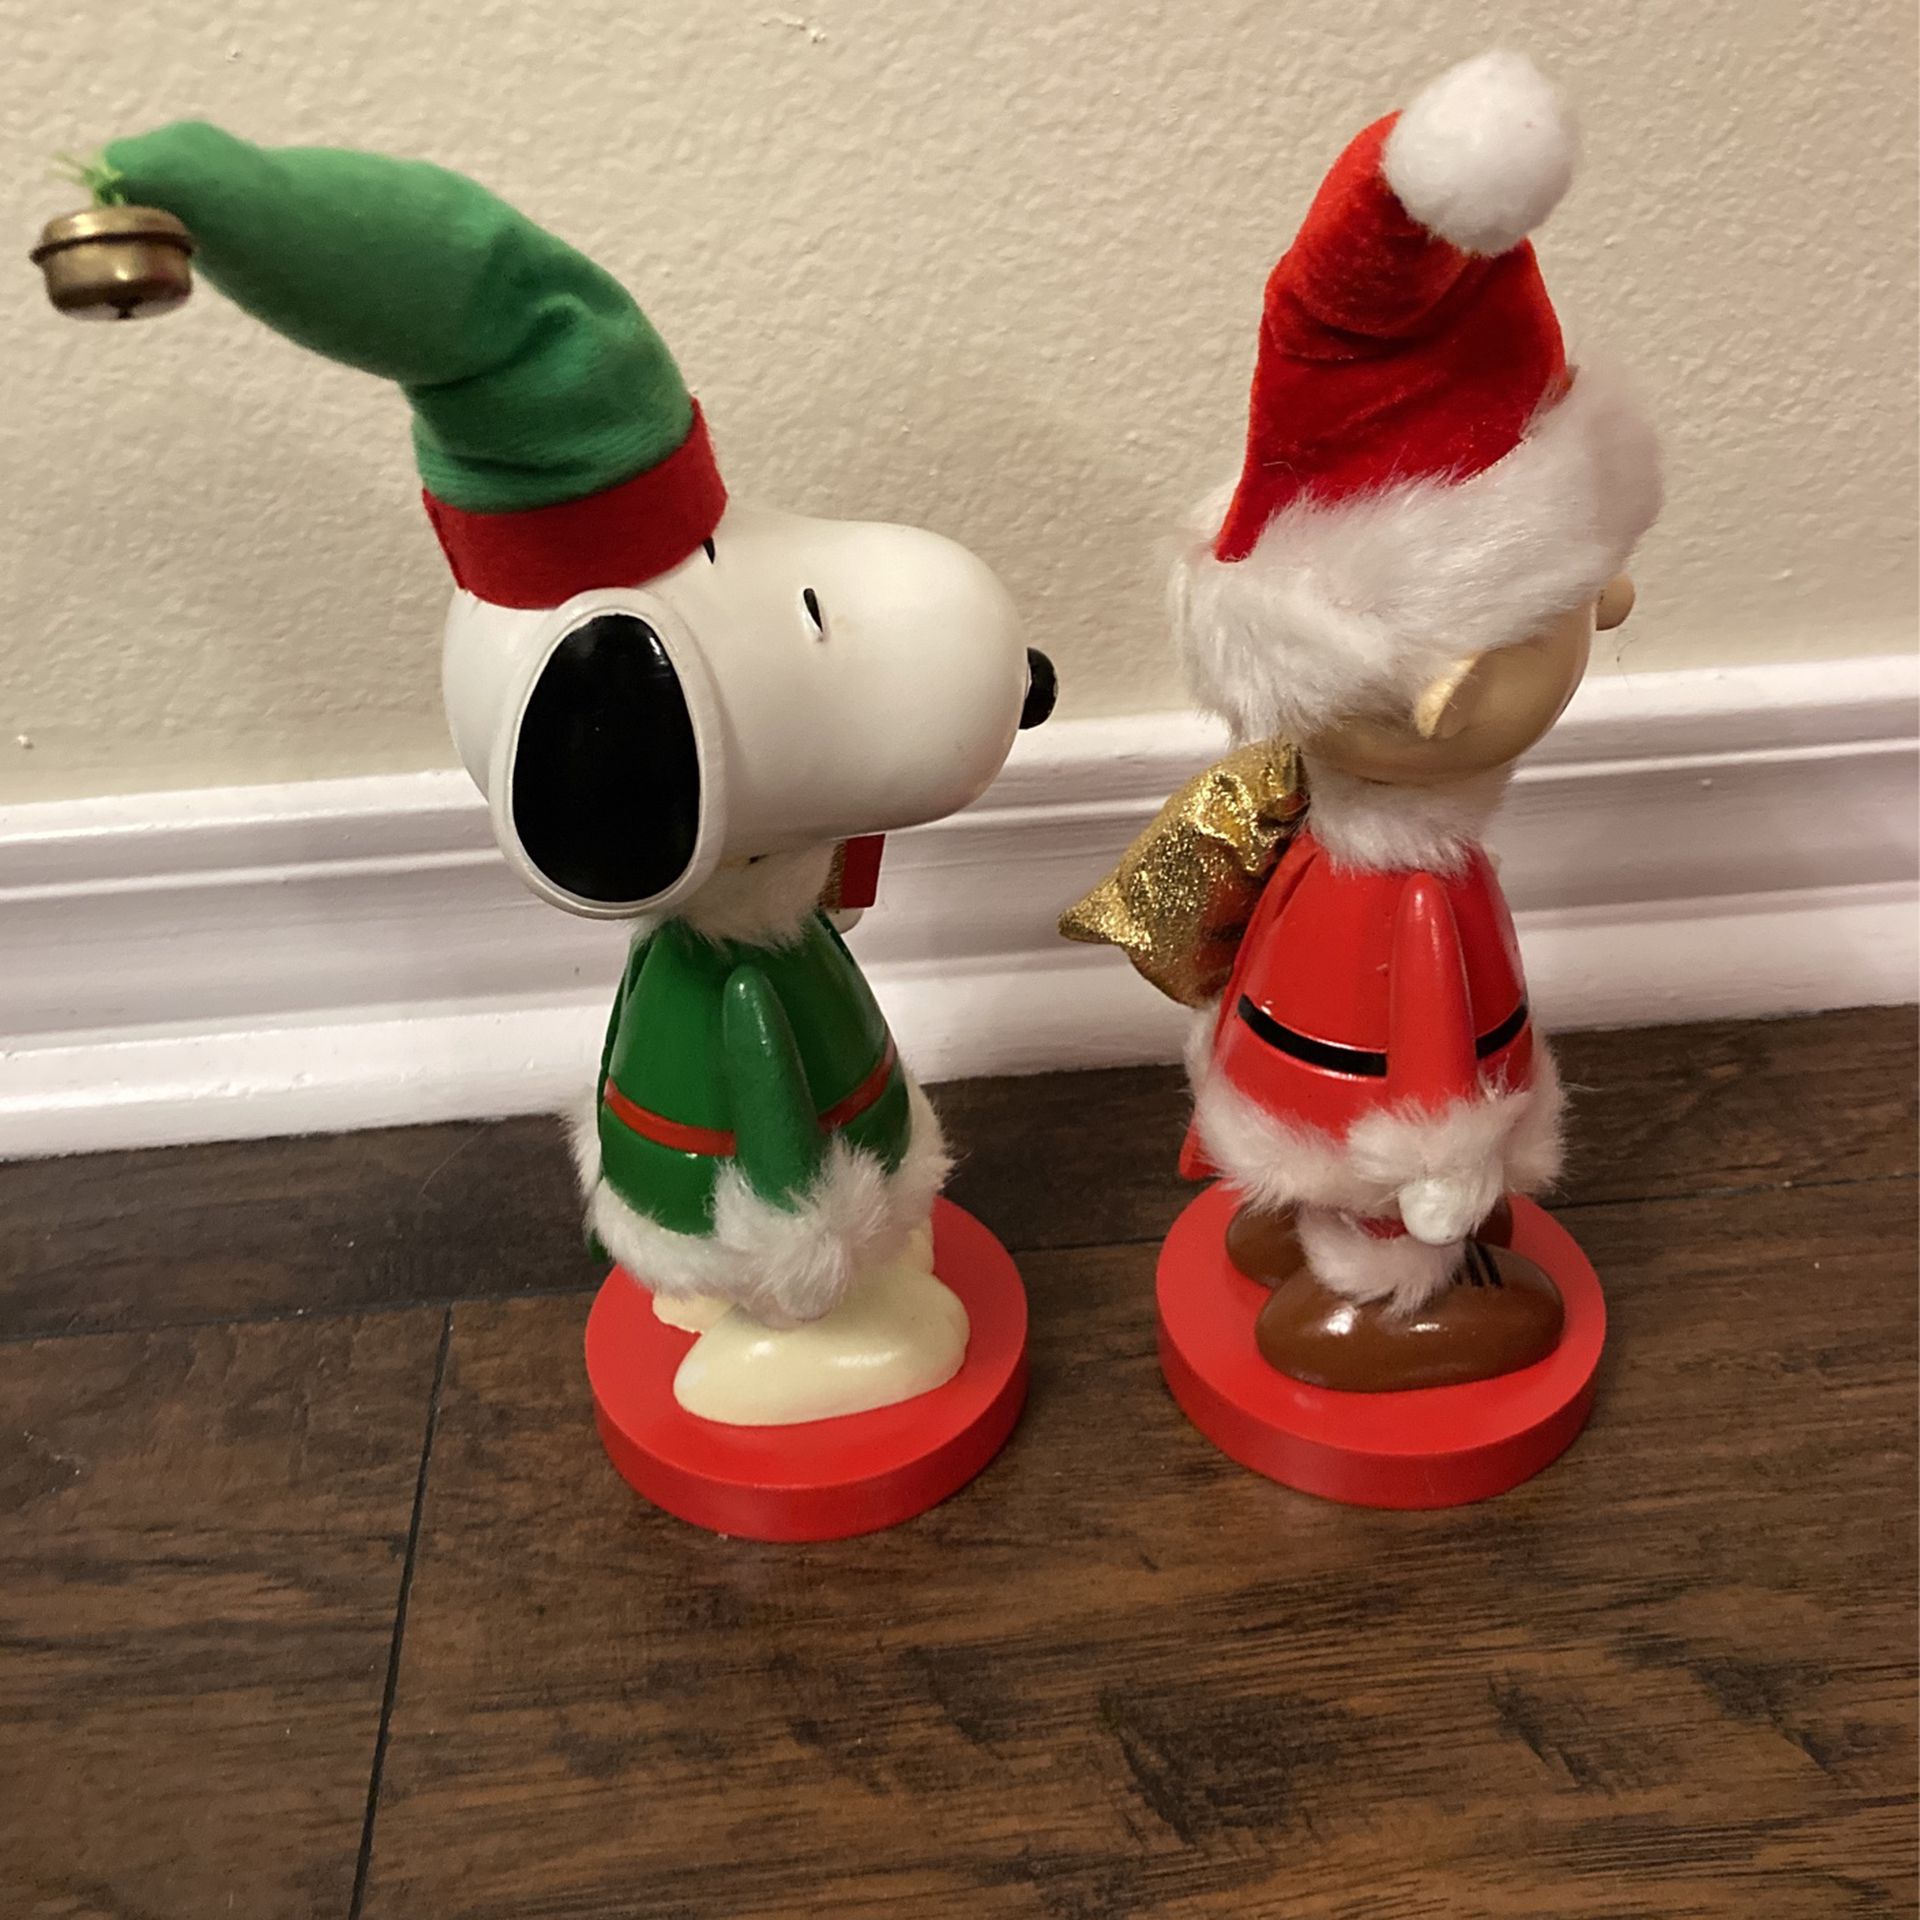 Snoopy and Charlie Brown Decorative Nutcrackers